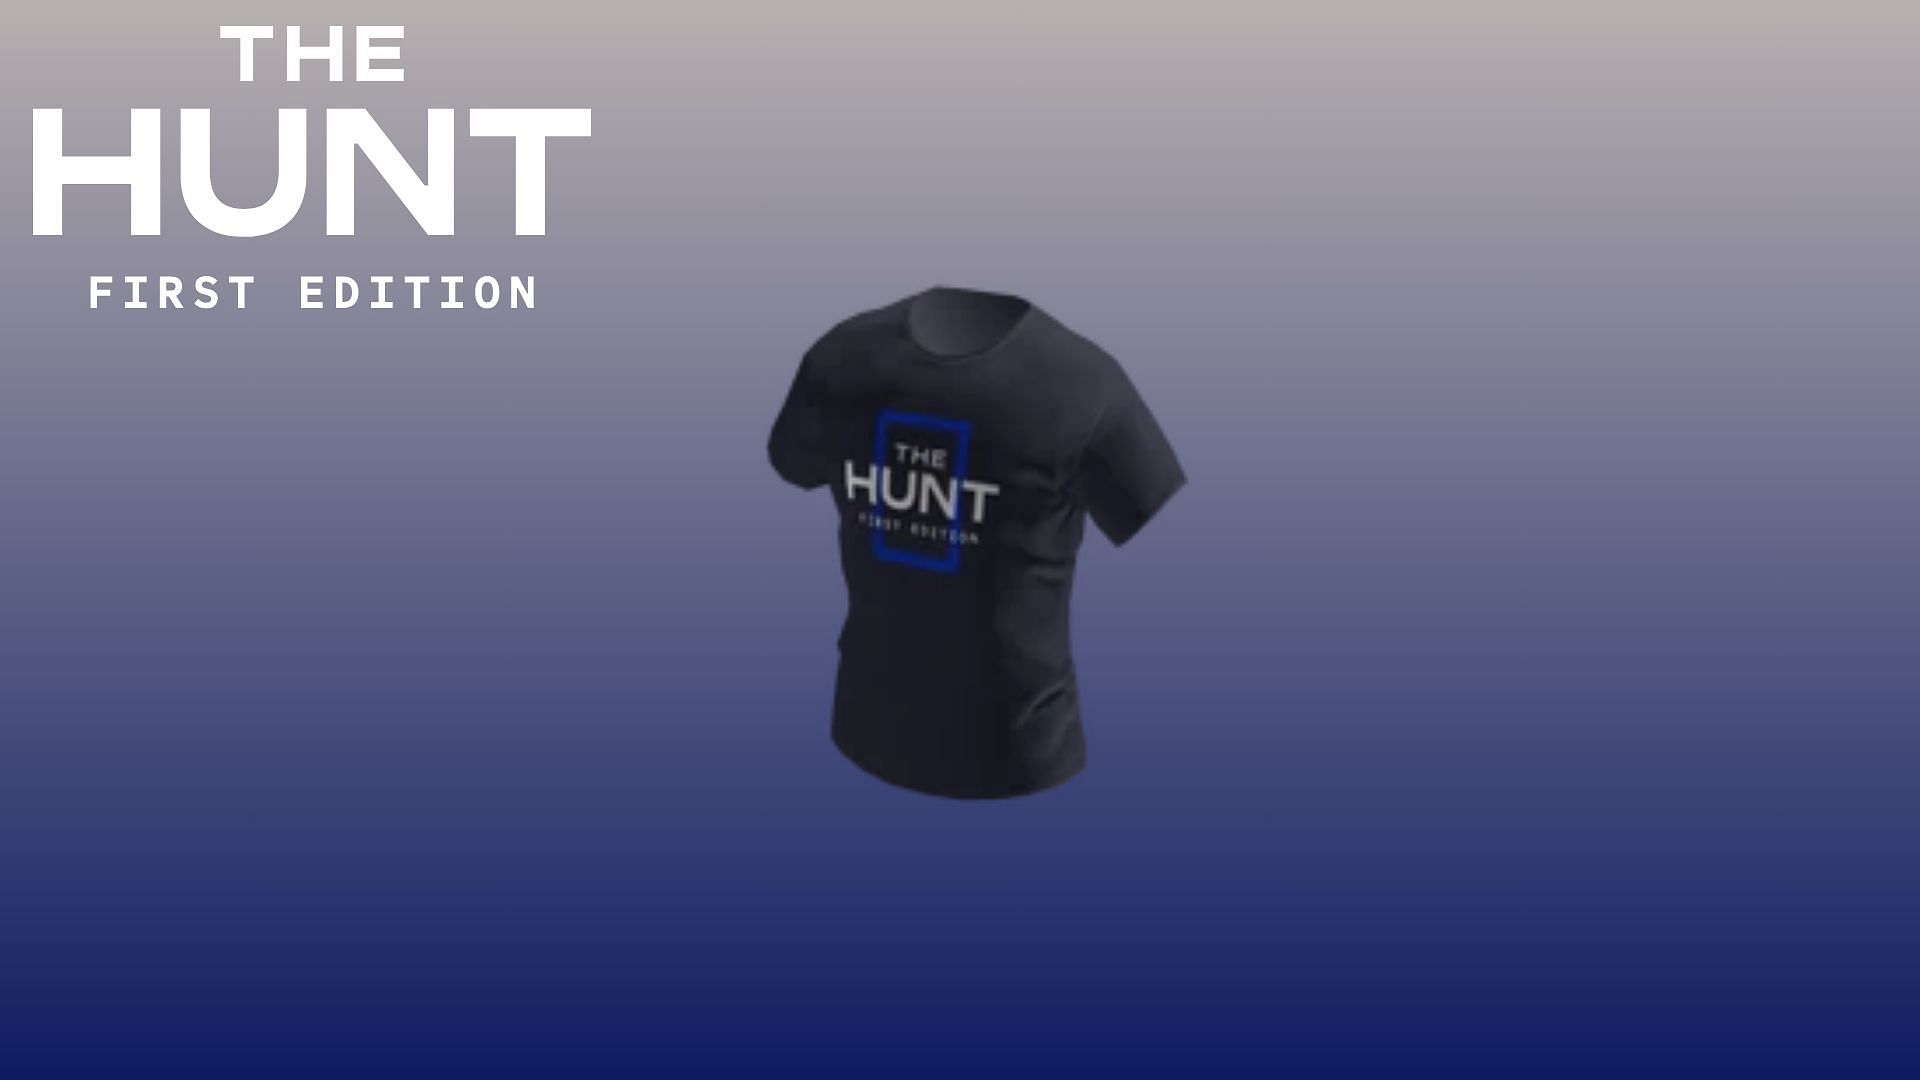 Featured image of The Hunt: First Edition T-Shirt (Image via Roblox)